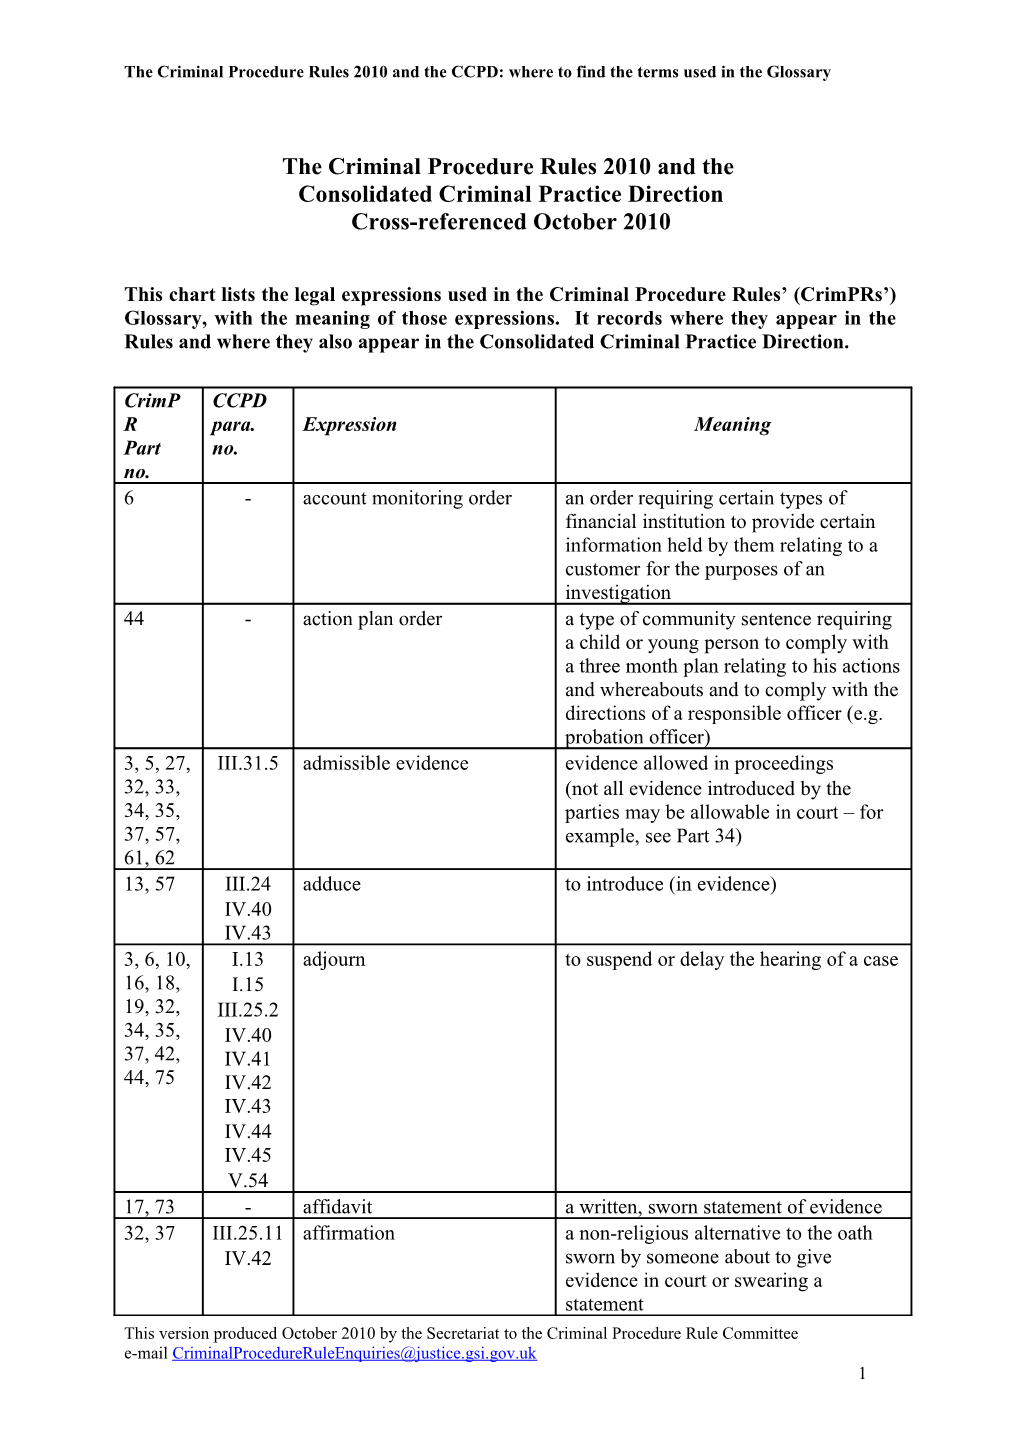 Terms Used in the Criminal Procedure Rules 2010 and the Consolidated Criminal Practice